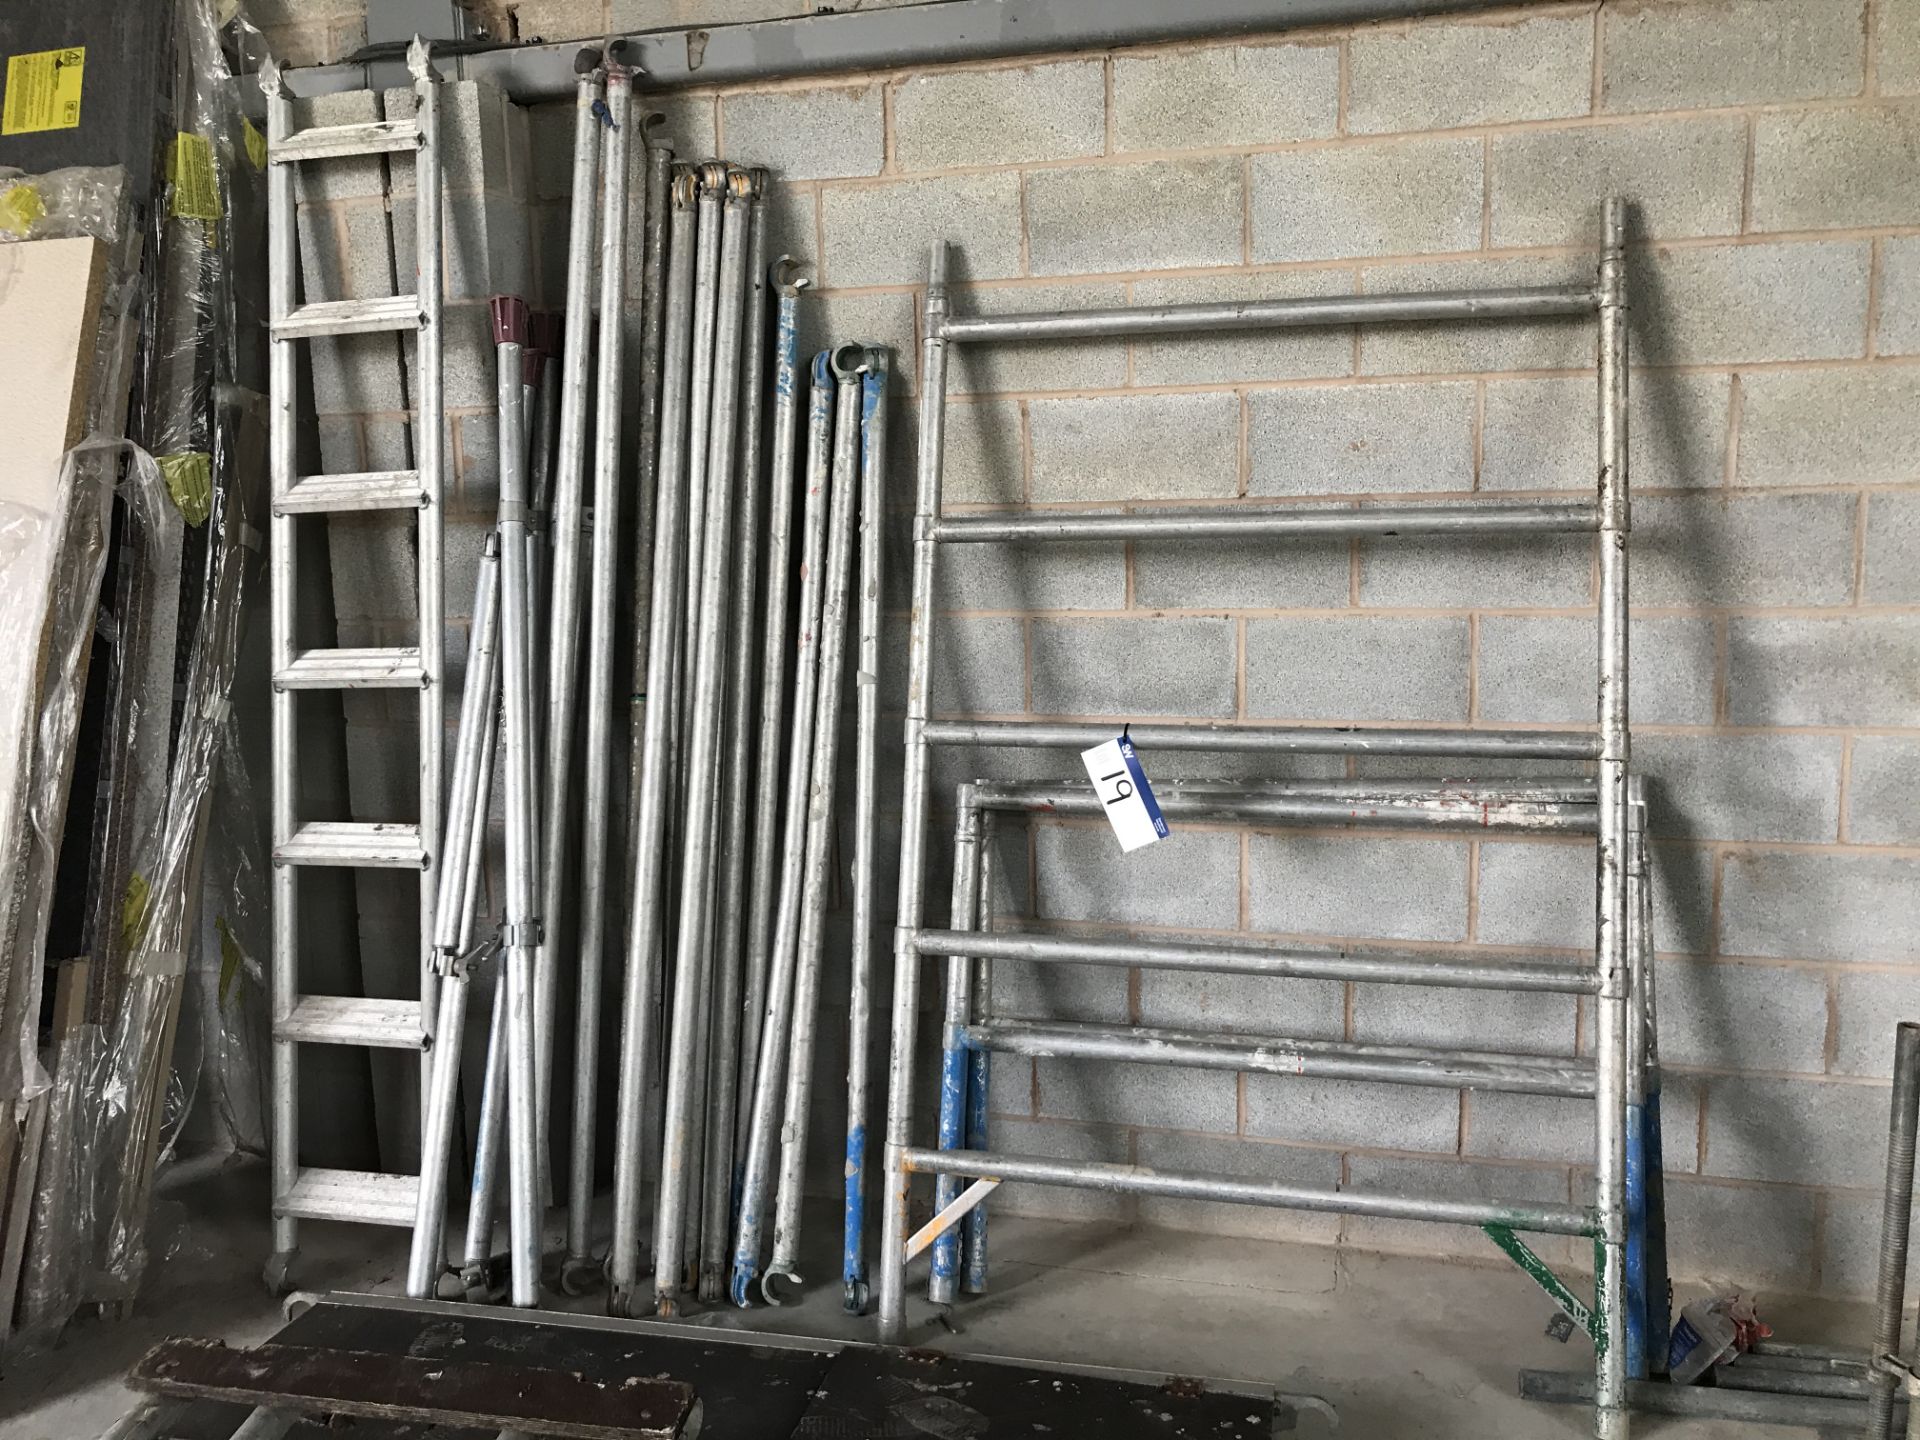 Scaffolding Components, as set out against wall - Image 3 of 3